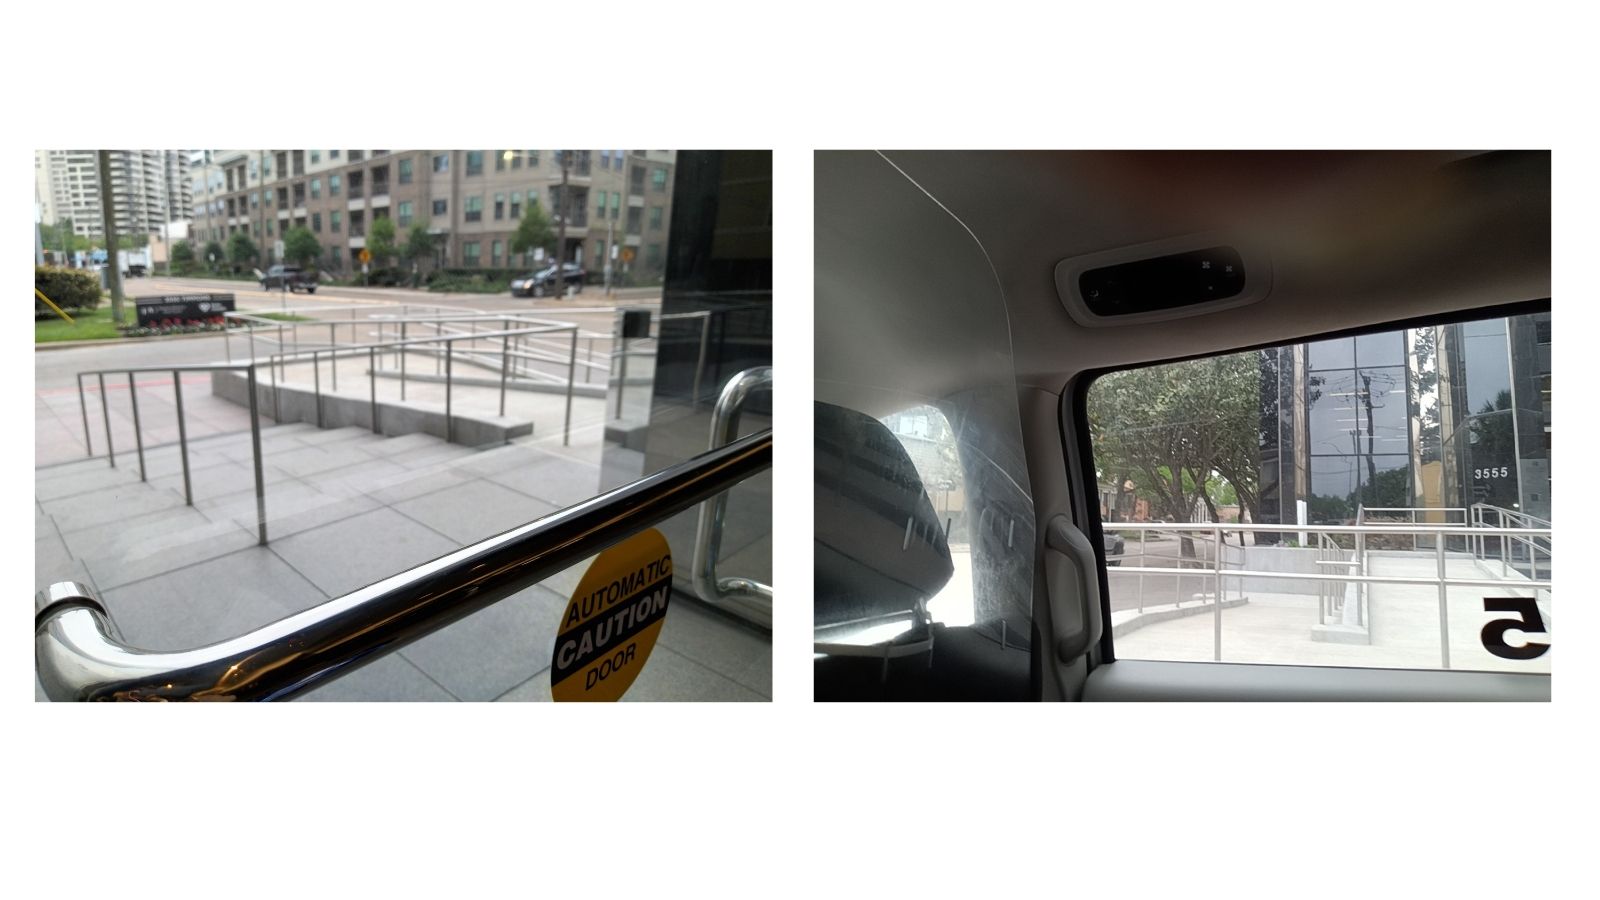 Two images depicting the new ramps at the entrance of the Houston-Galveston Area Council taken from inside a Metro Lift vehicle. Advocacy for More Accessibility and Safety